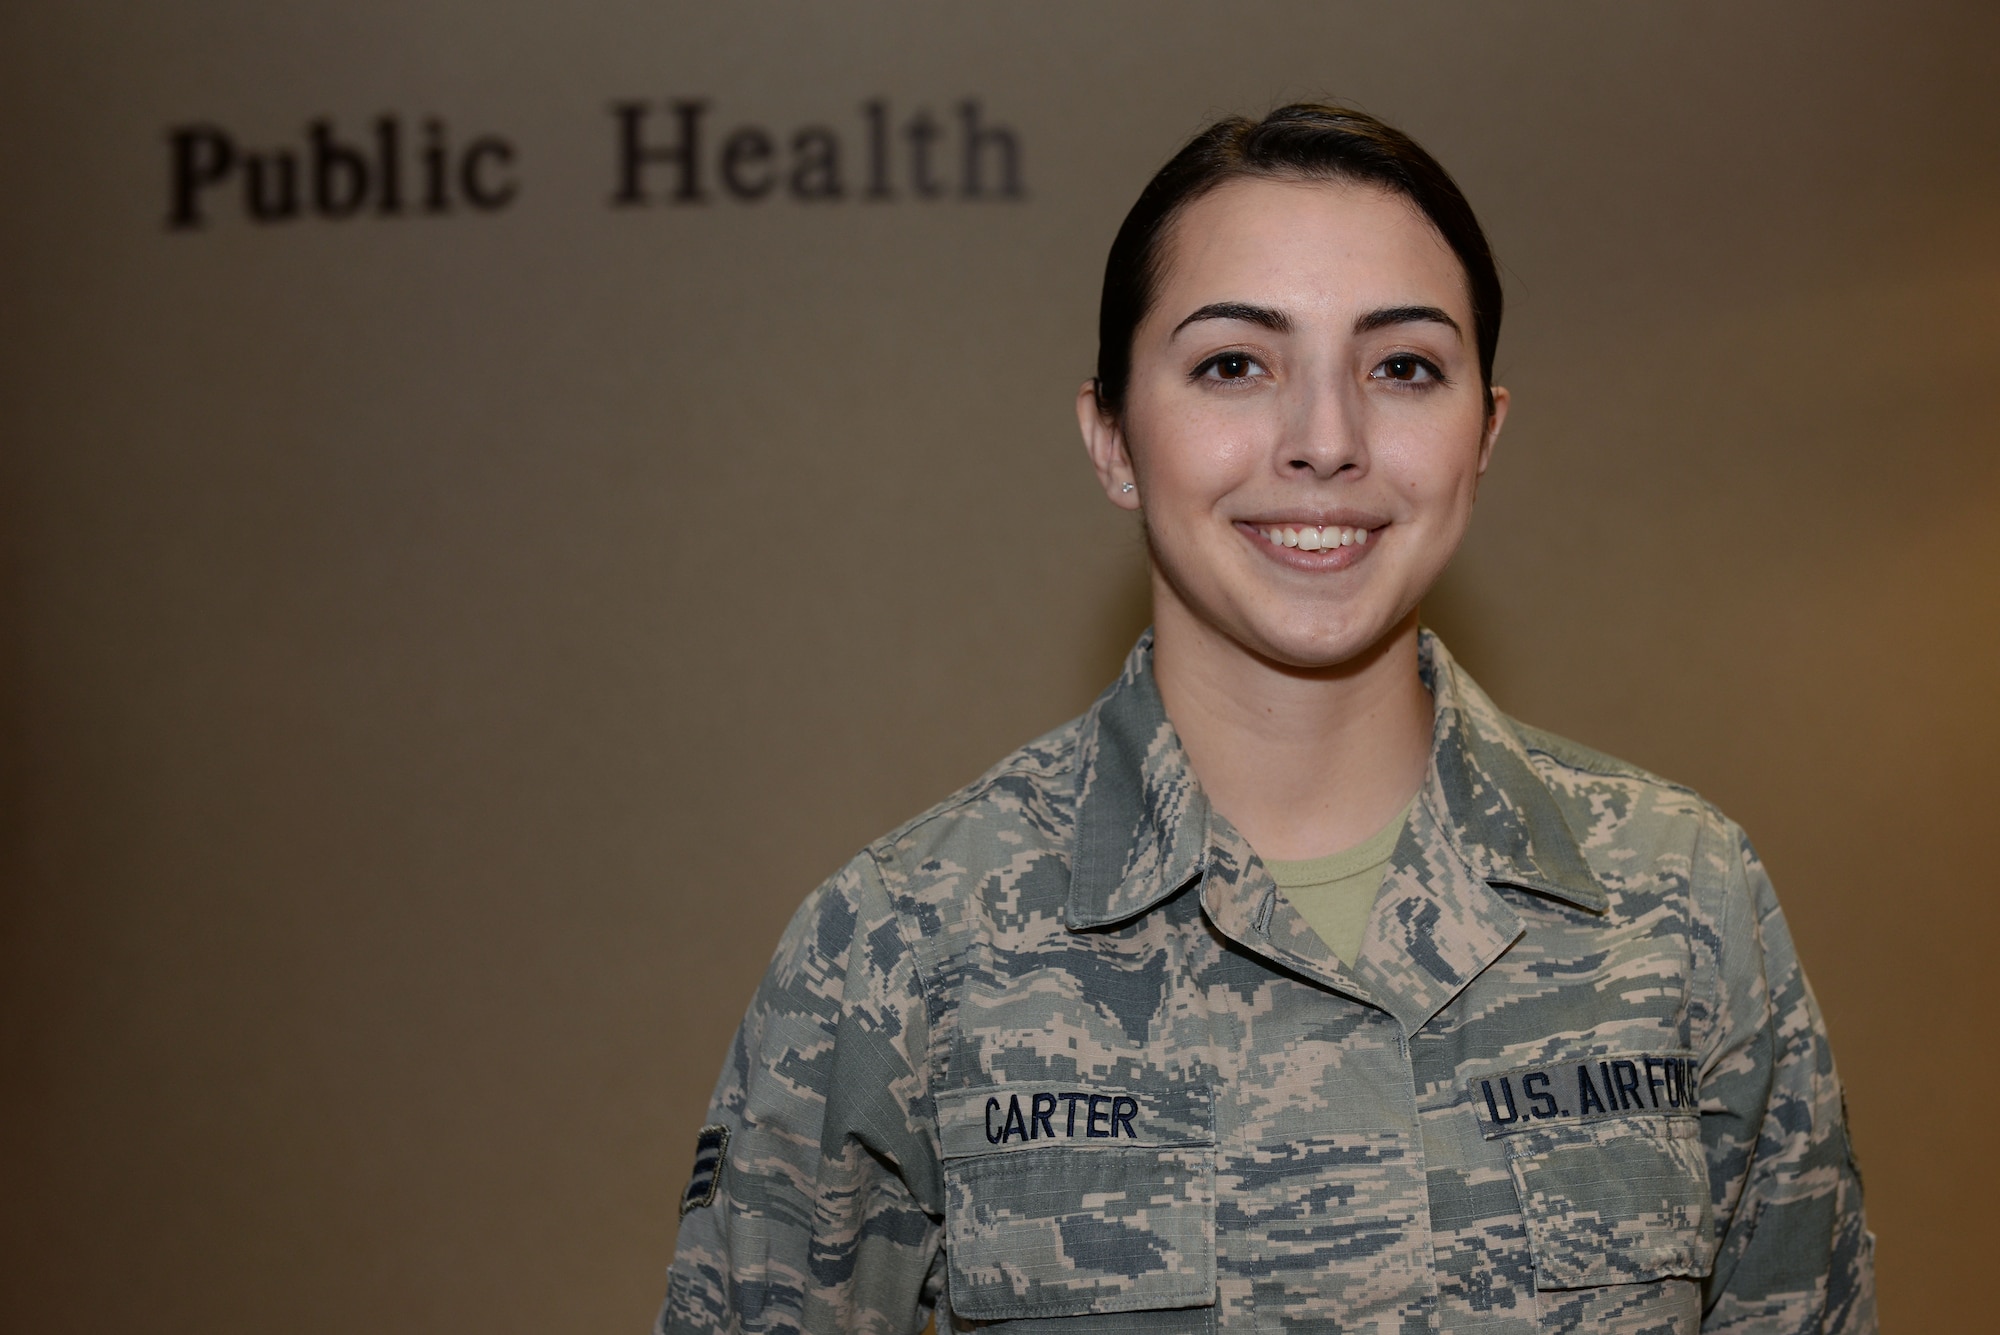 U.S. Air Force Senior Airman Autumn Carter, 19th Aerospace Medicine Squadron public health technician, was nominated as Combat Airlifter of the Week April 3, 2017, at Little Rock Air Force Base, Ark. Carter shows excellence through her efforts to ensure the individual readiness and occupational needs of 3,600 Team Little Rock personnel. 